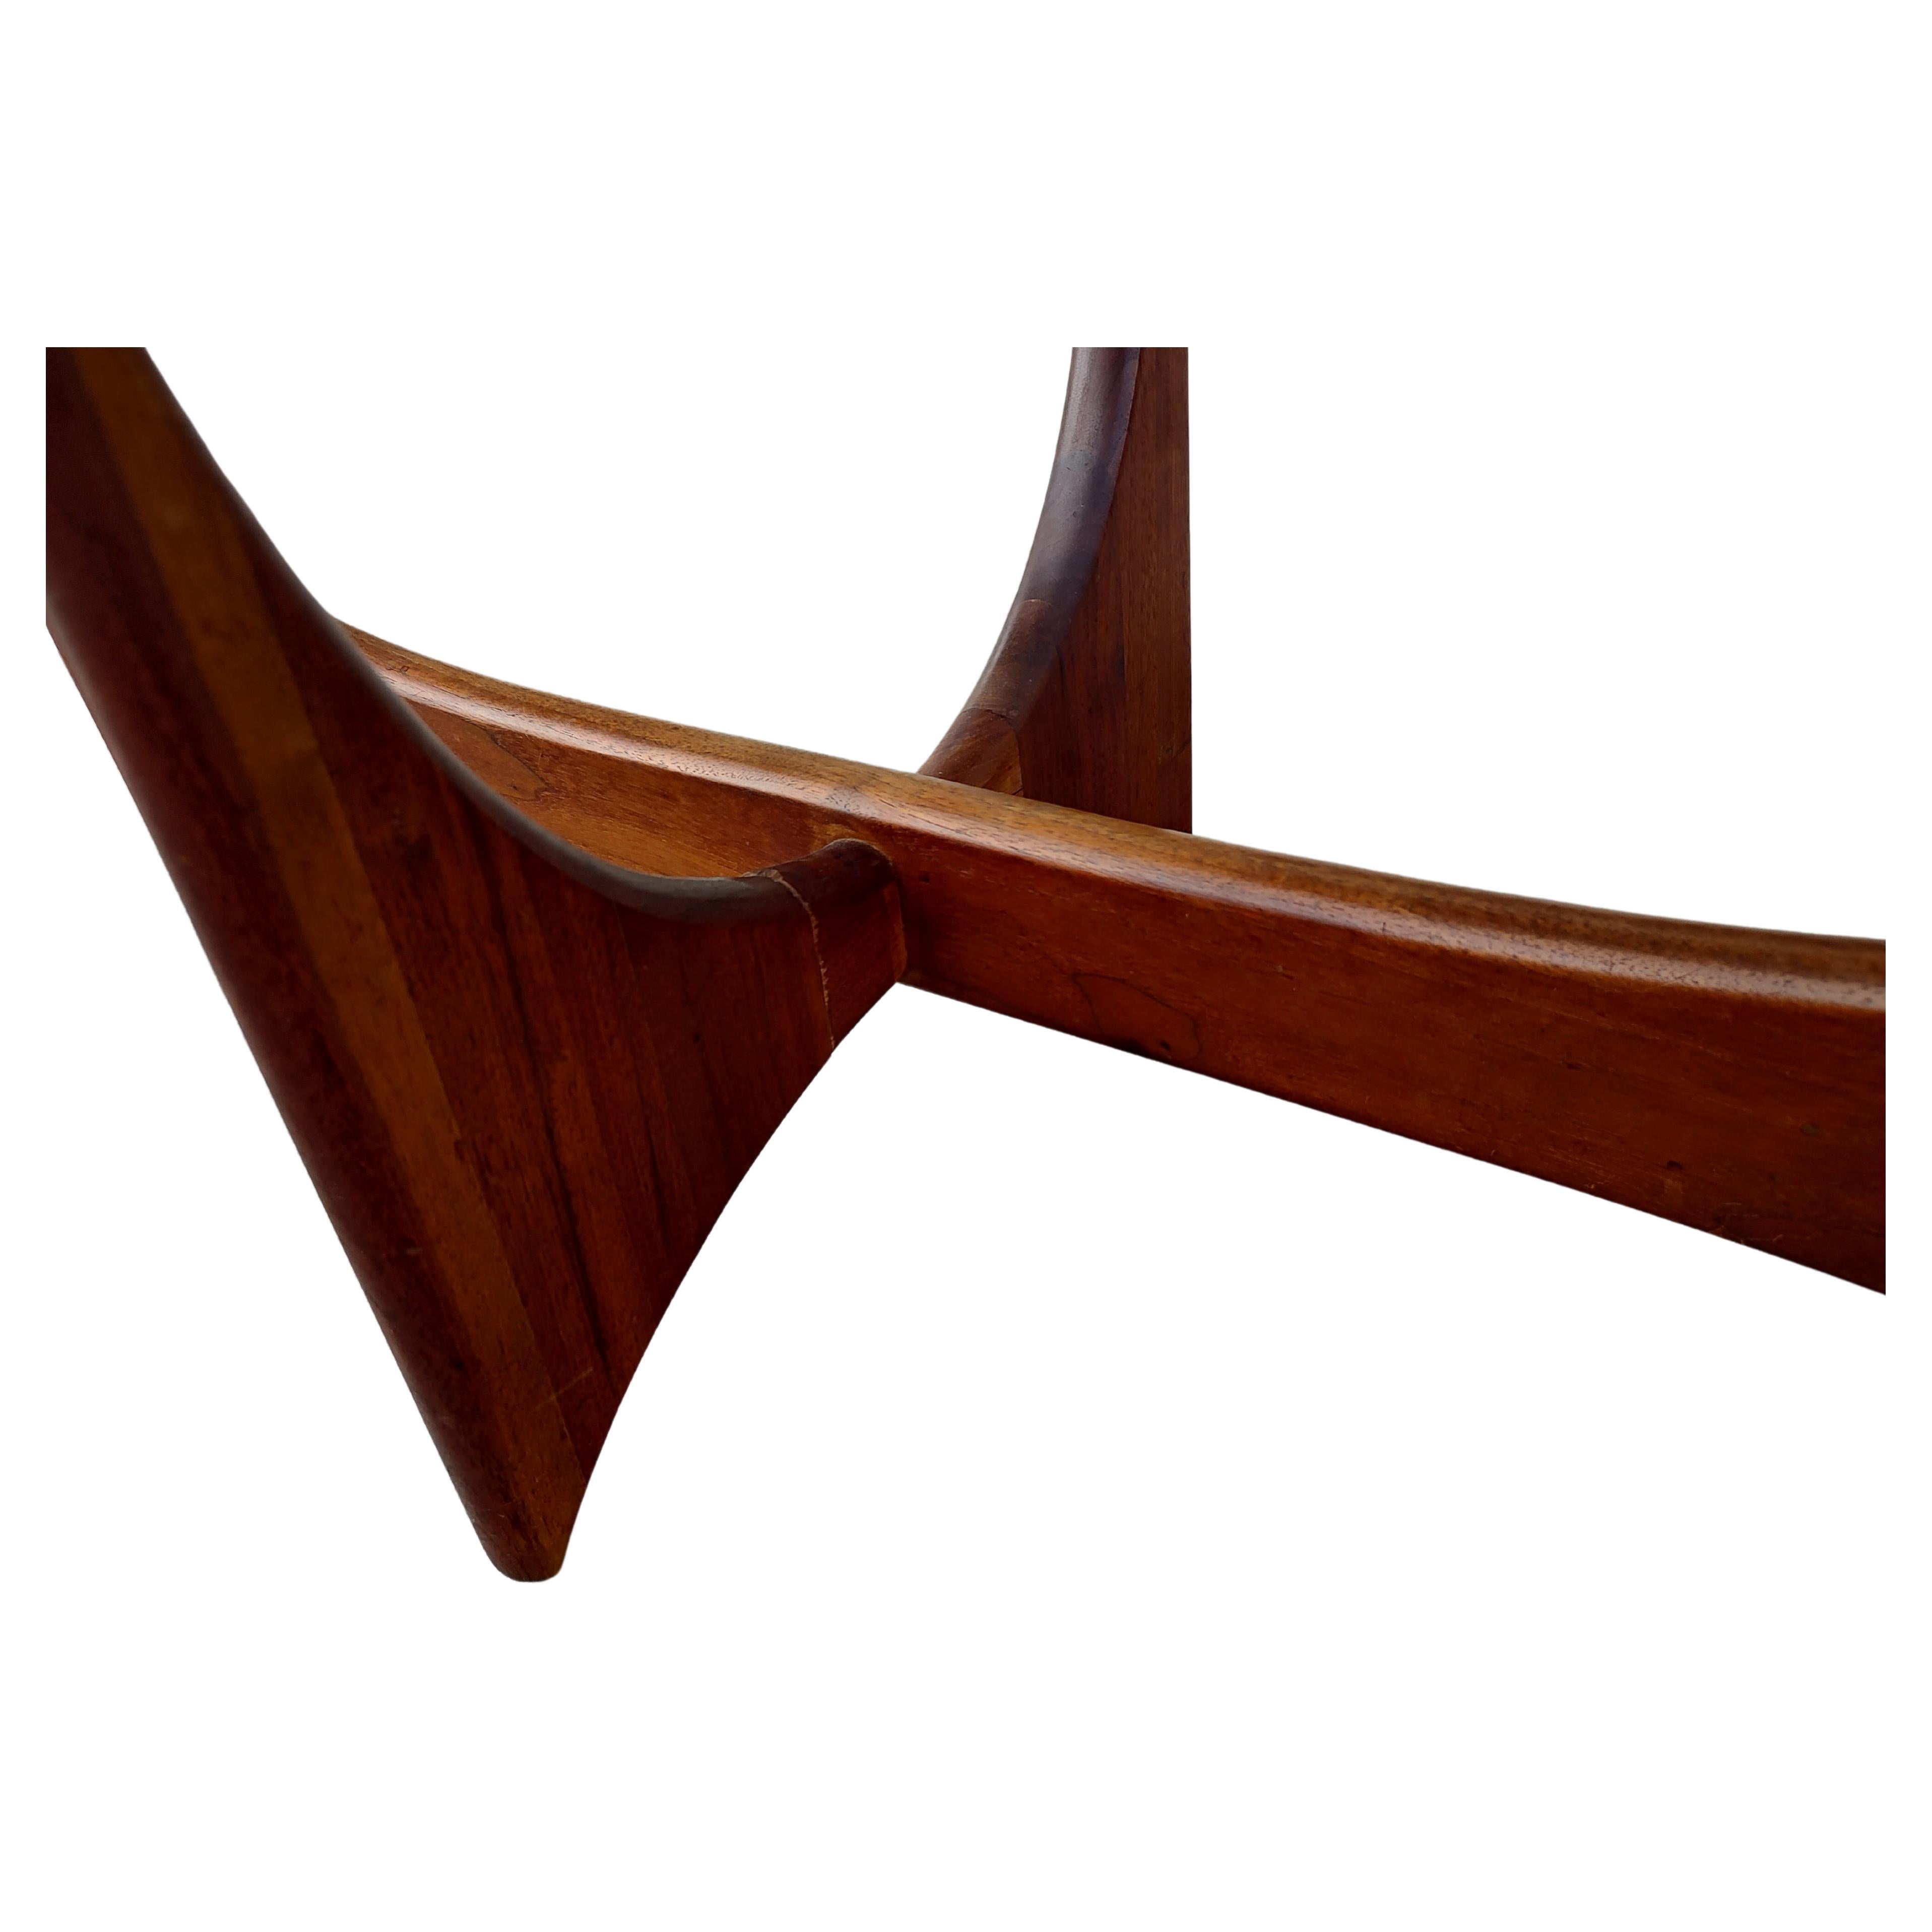 Mid-Century Modern Stingray Sculptural Cocktail Table by Adrian Pearsall 2399-TC In Good Condition For Sale In Port Jervis, NY